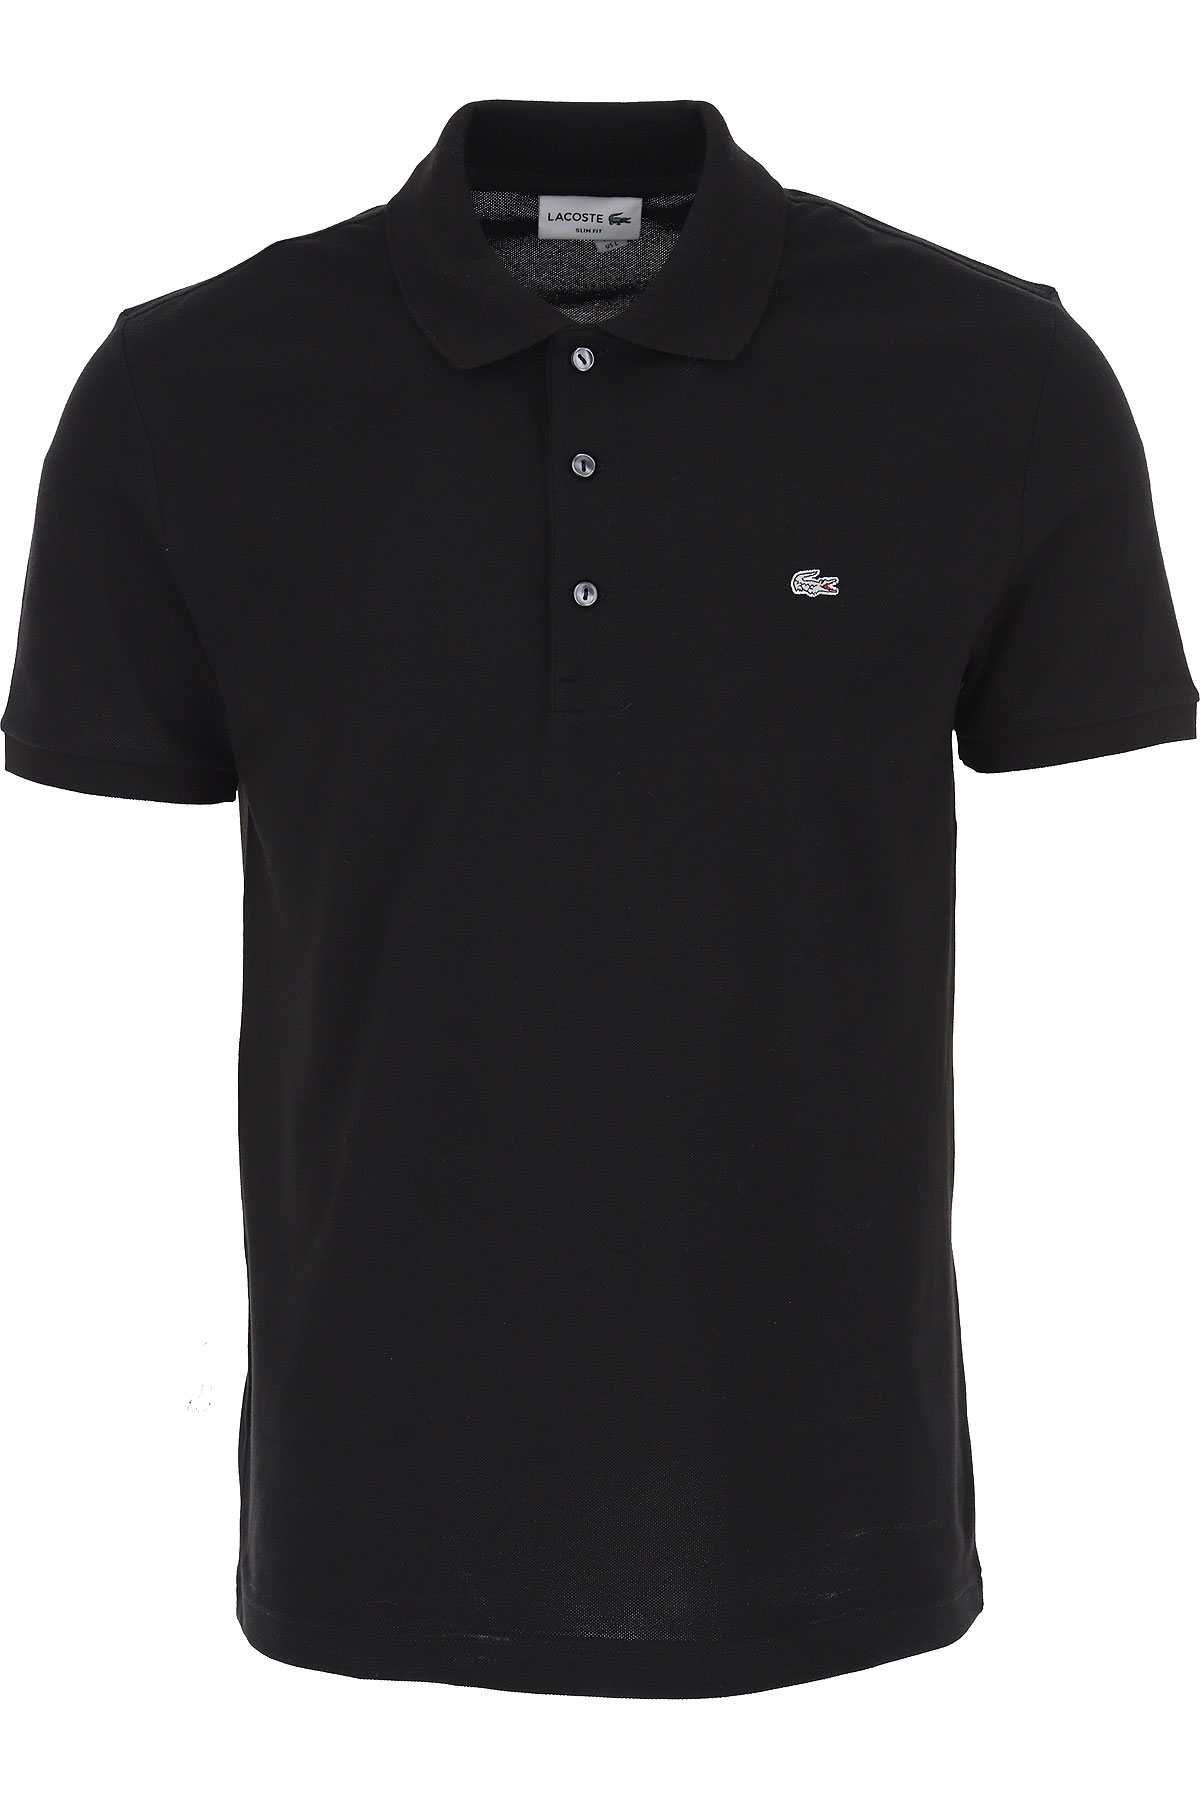 Mens Clothing Lacoste, Style code: ph4014-0314-